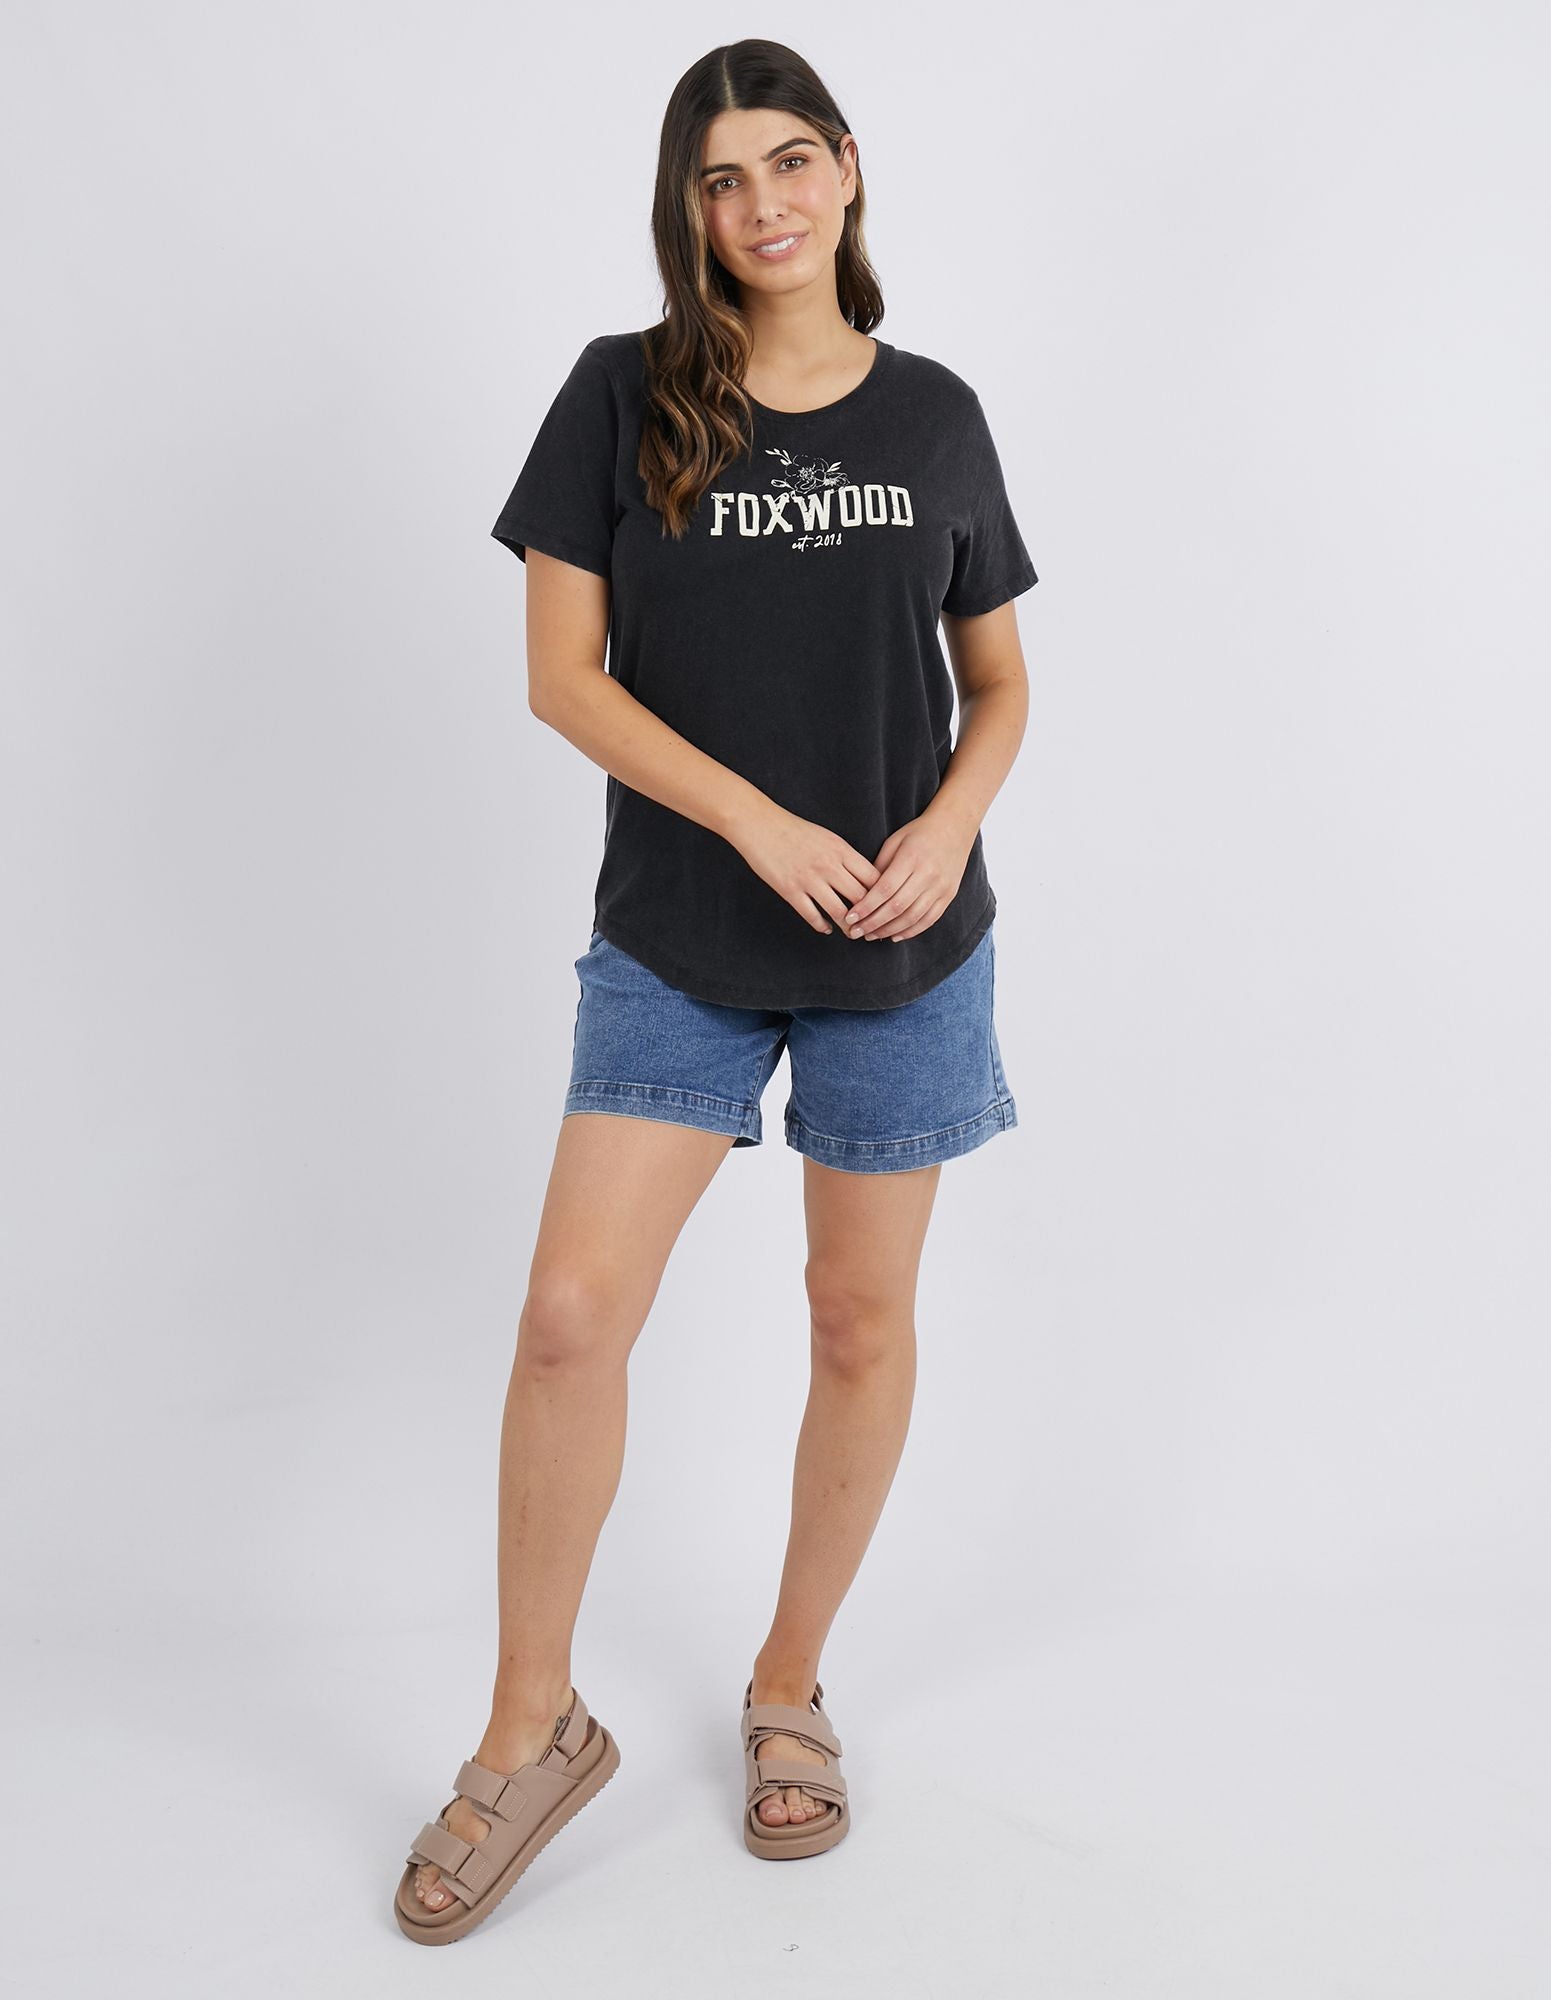 Gather Tee - Washed Black - Foxwood - FUDGE Gifts Home Lifestyle